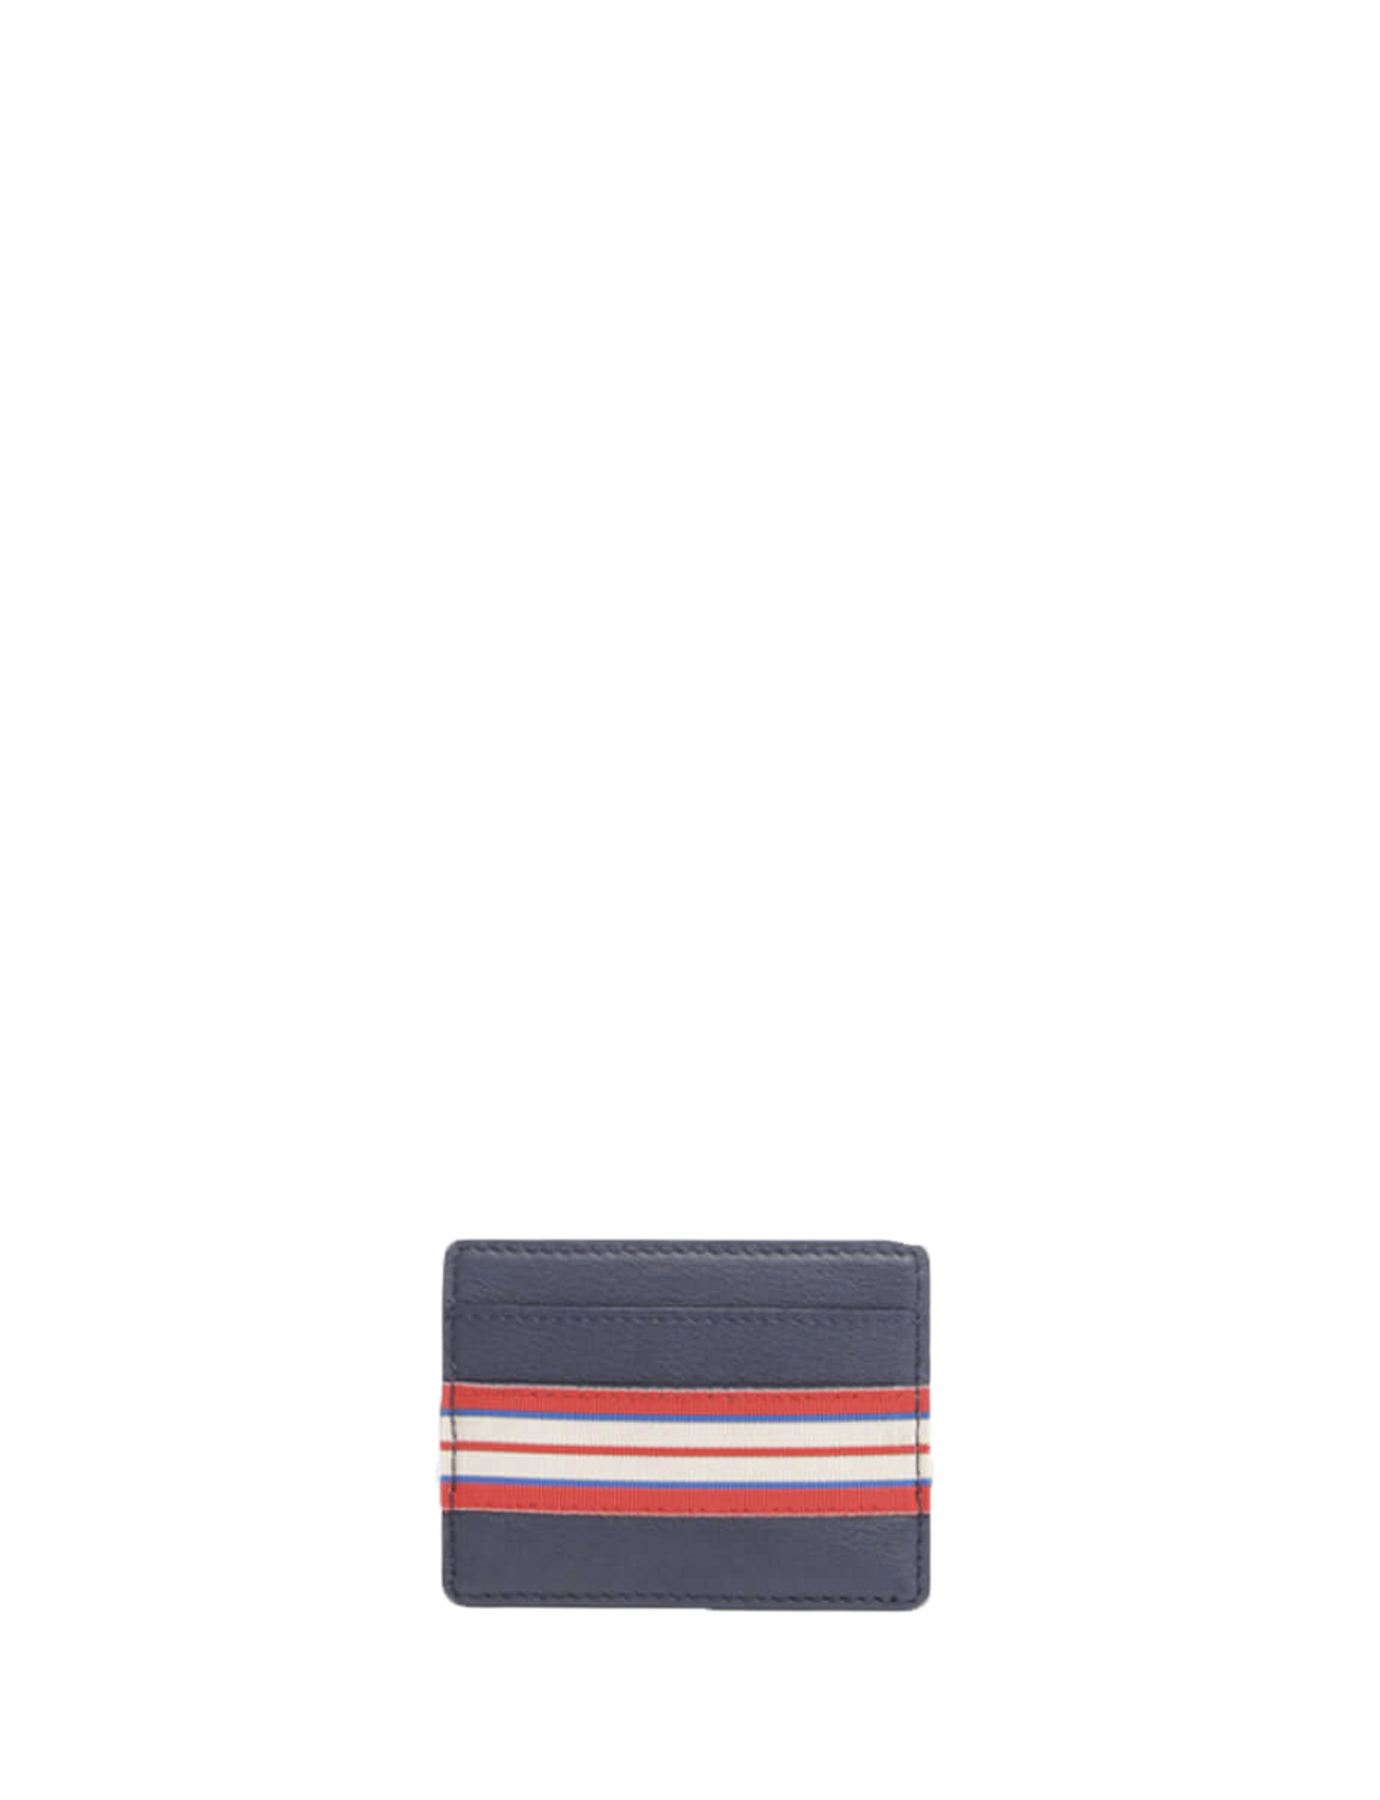 cardholder-simple-the-parisian-navy-leather